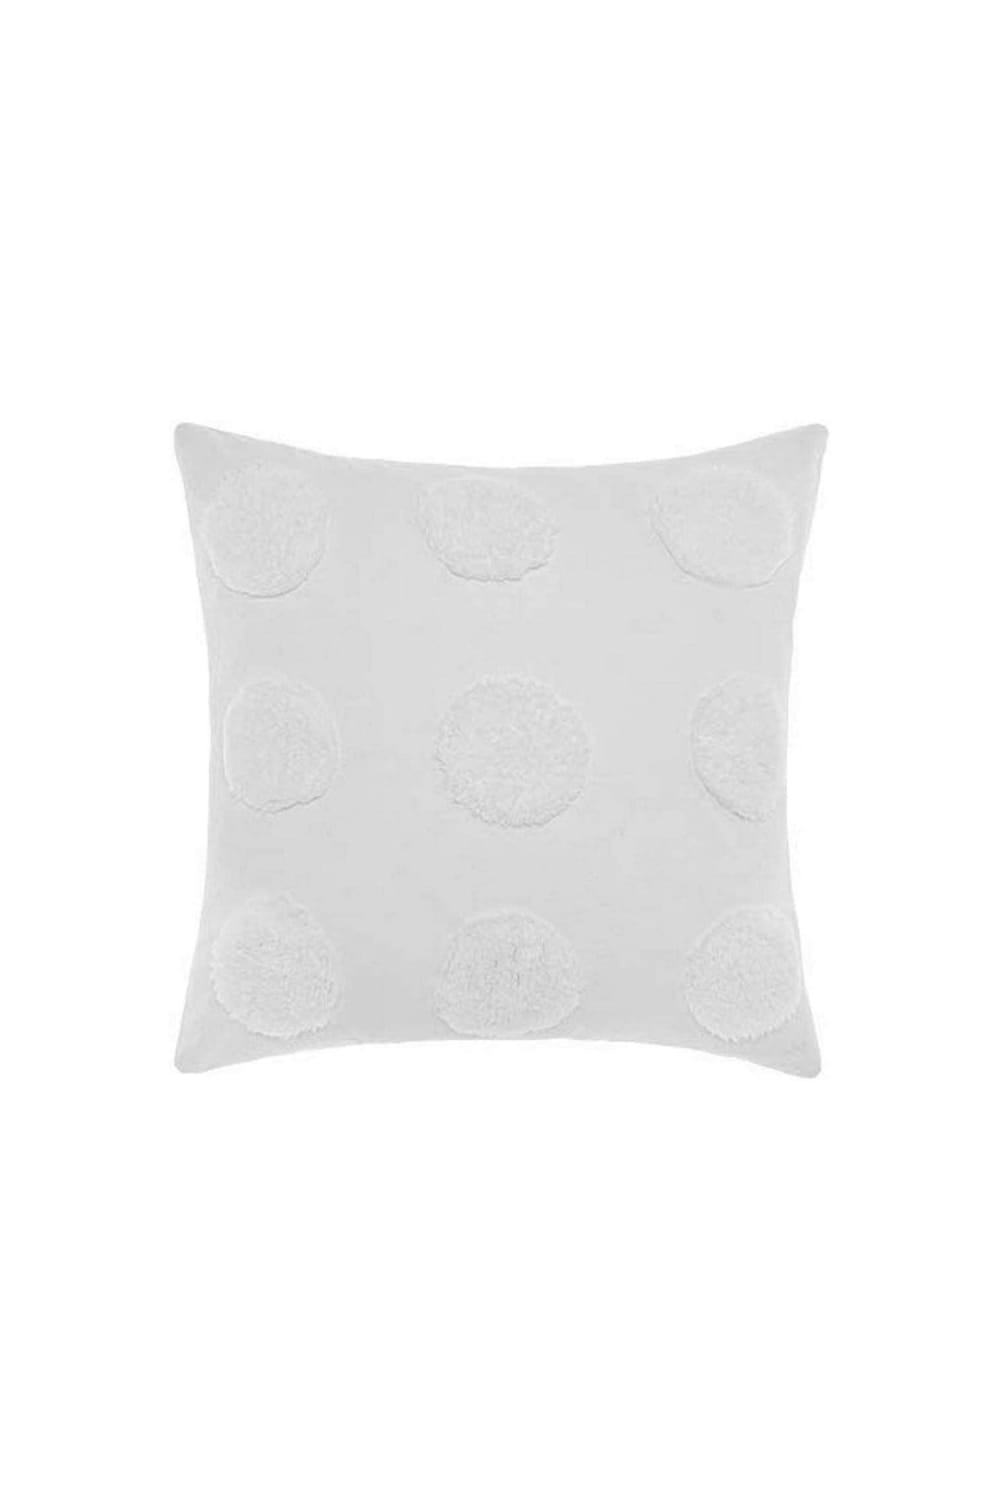 Linen House Haze Cushion Cover (White) (One Size)